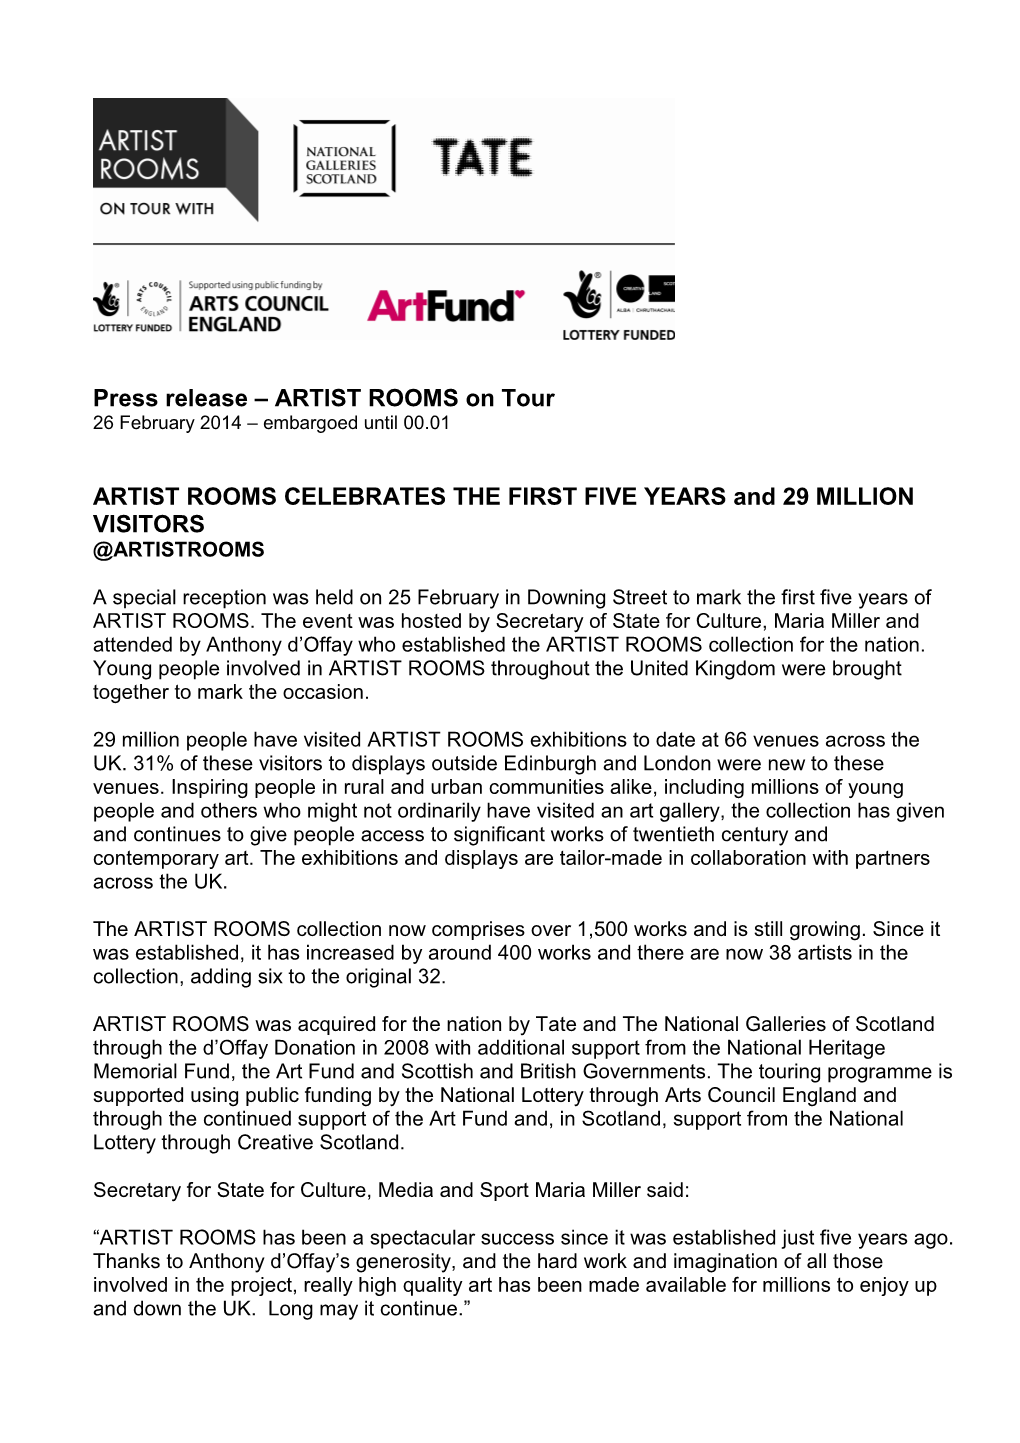 Press Release – ARTIST ROOMS on Tour ARTIST ROOMS